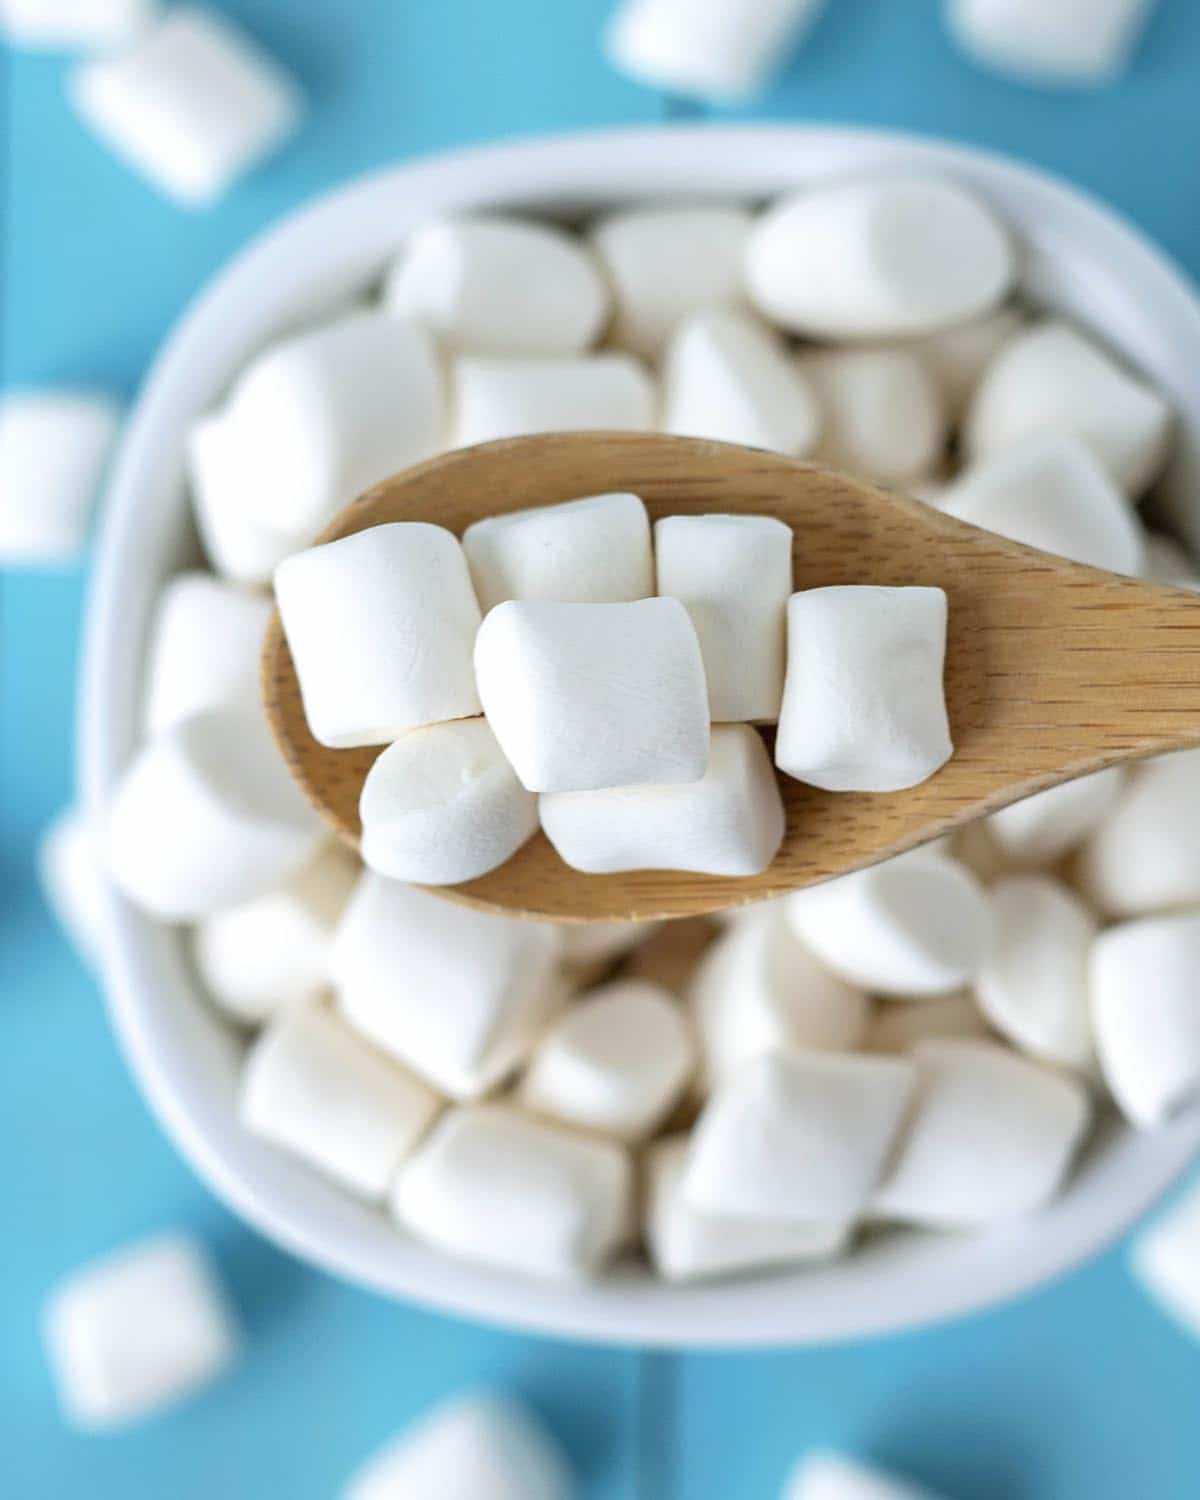 A small wood spoon full of vegan marshmallows being held over a bowl.